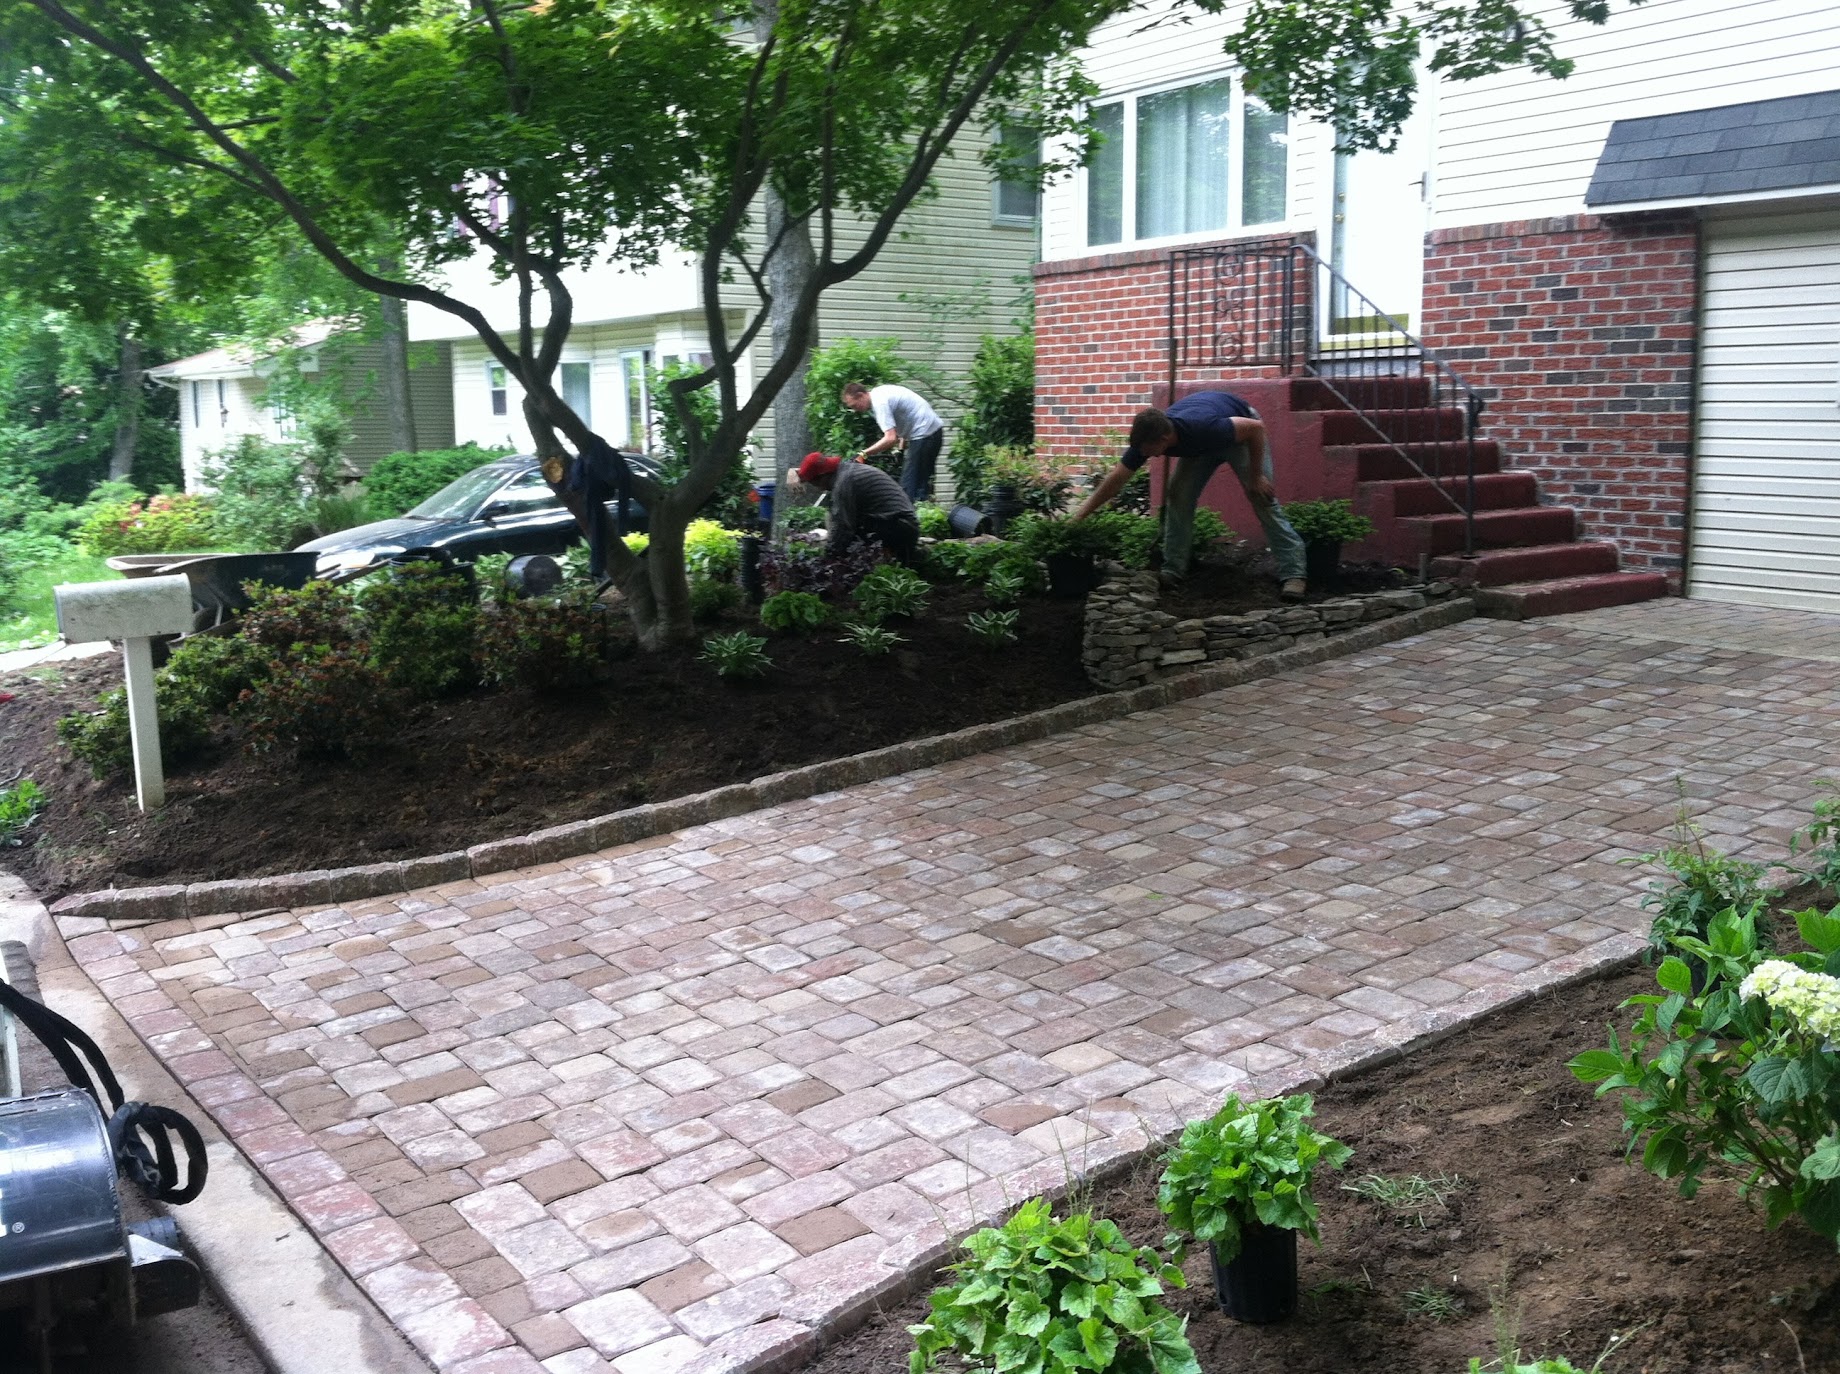 Landscapers installing plants in a flower bed in front of a house